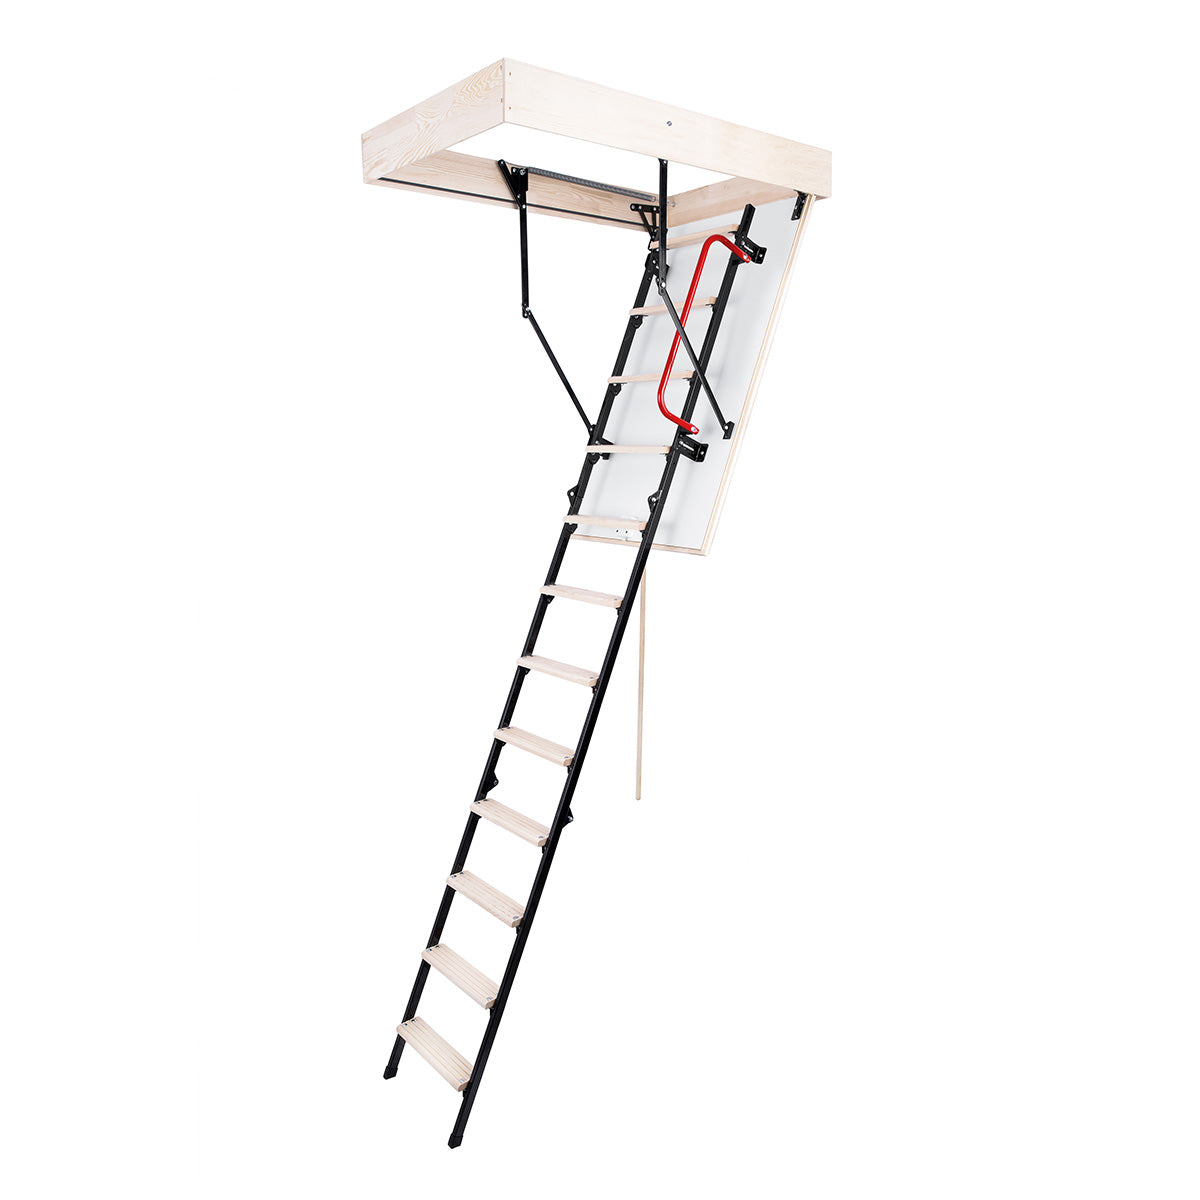 Stallux Termo - Metal-Wooden Basic Insulated Attic Ladder - 55 in. x 21.5 in. - Up to 9.18 feet